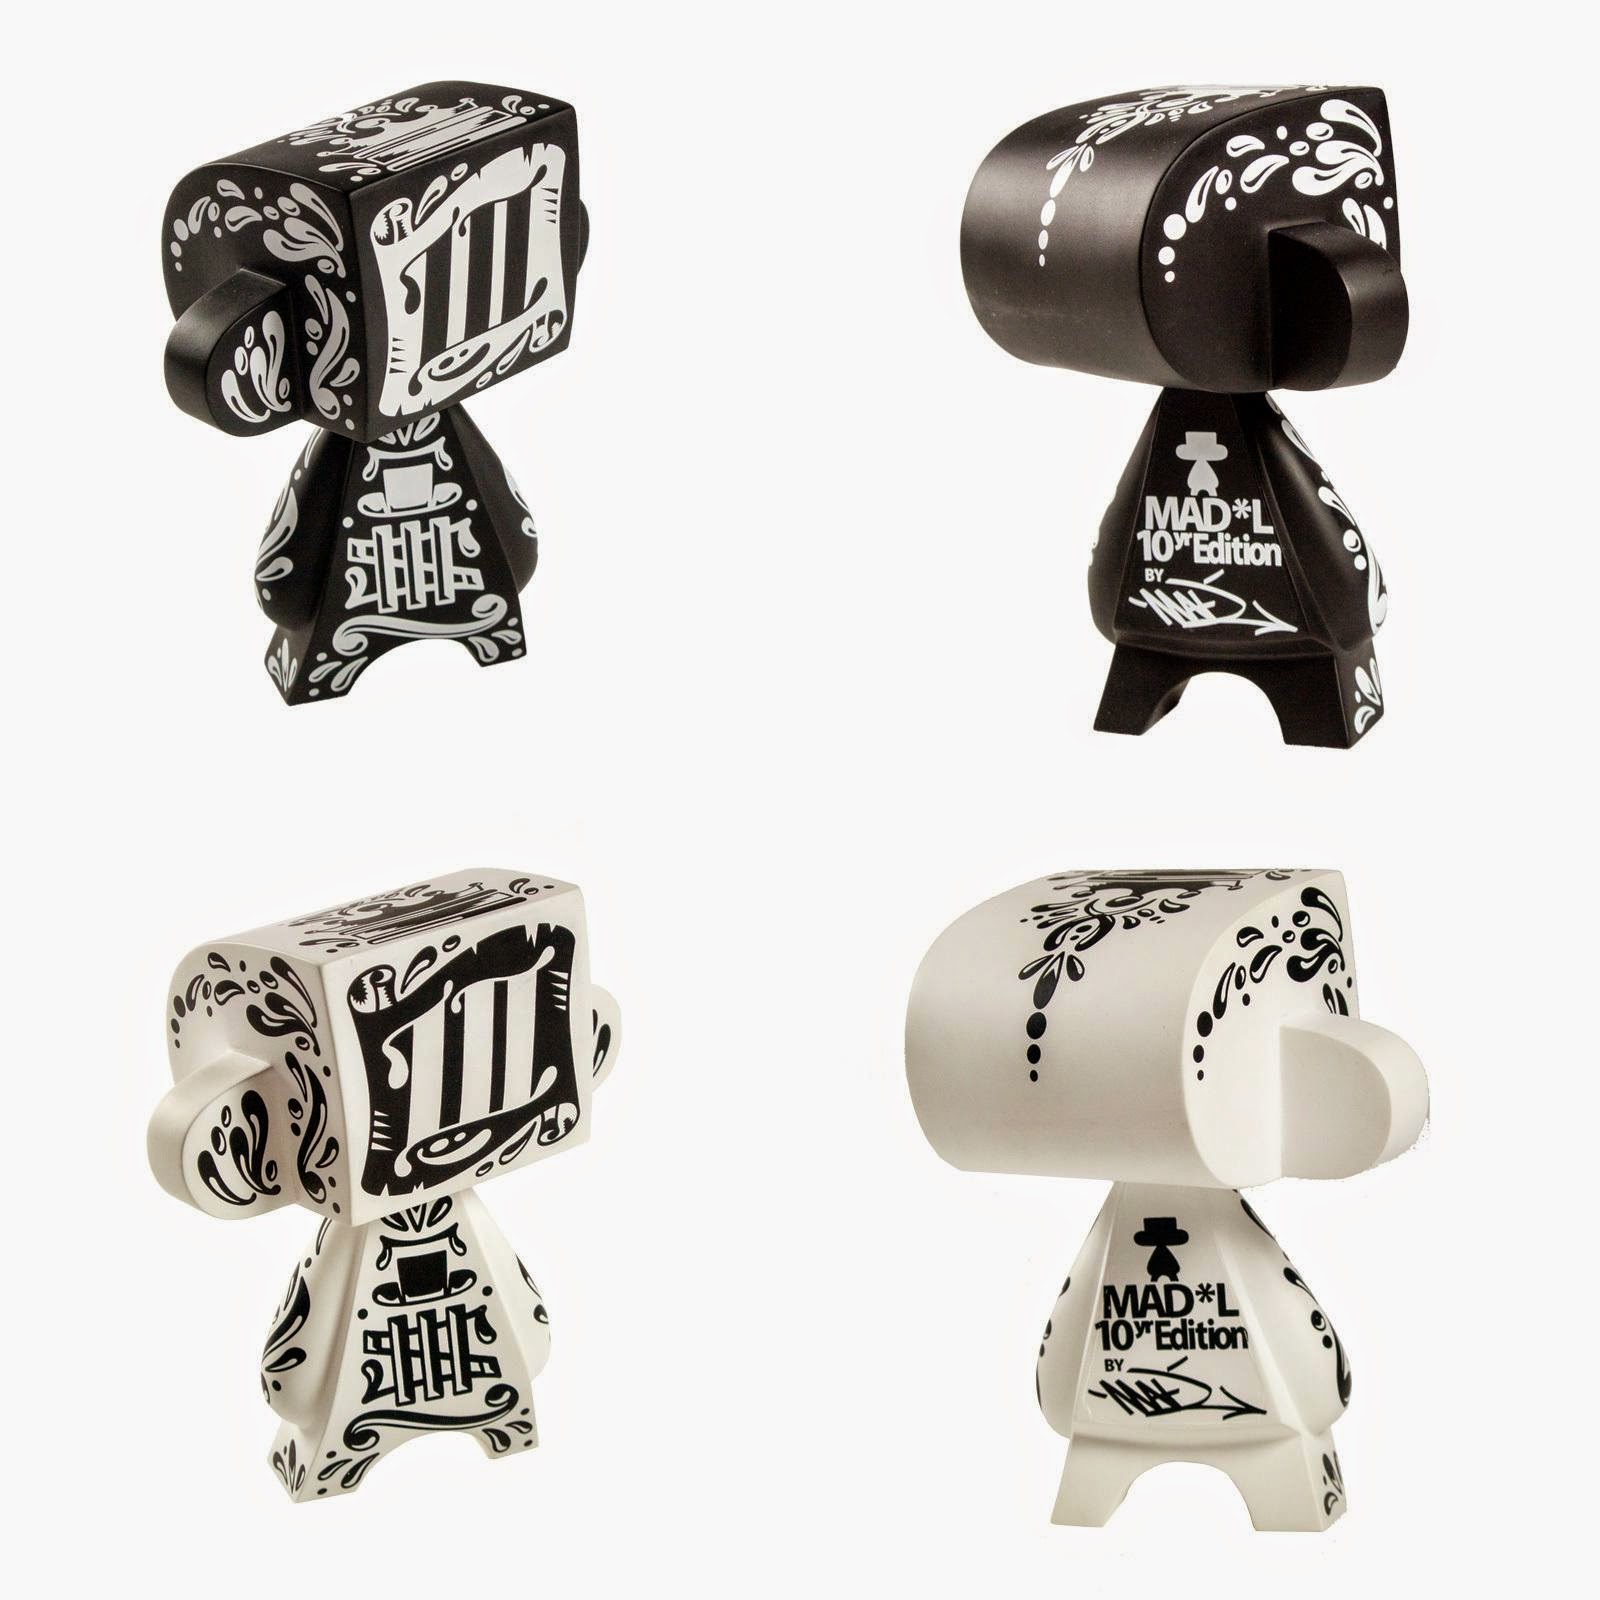 10 Year Edition Mad*L 5” Black and White Vinyl Figure Set by MAD